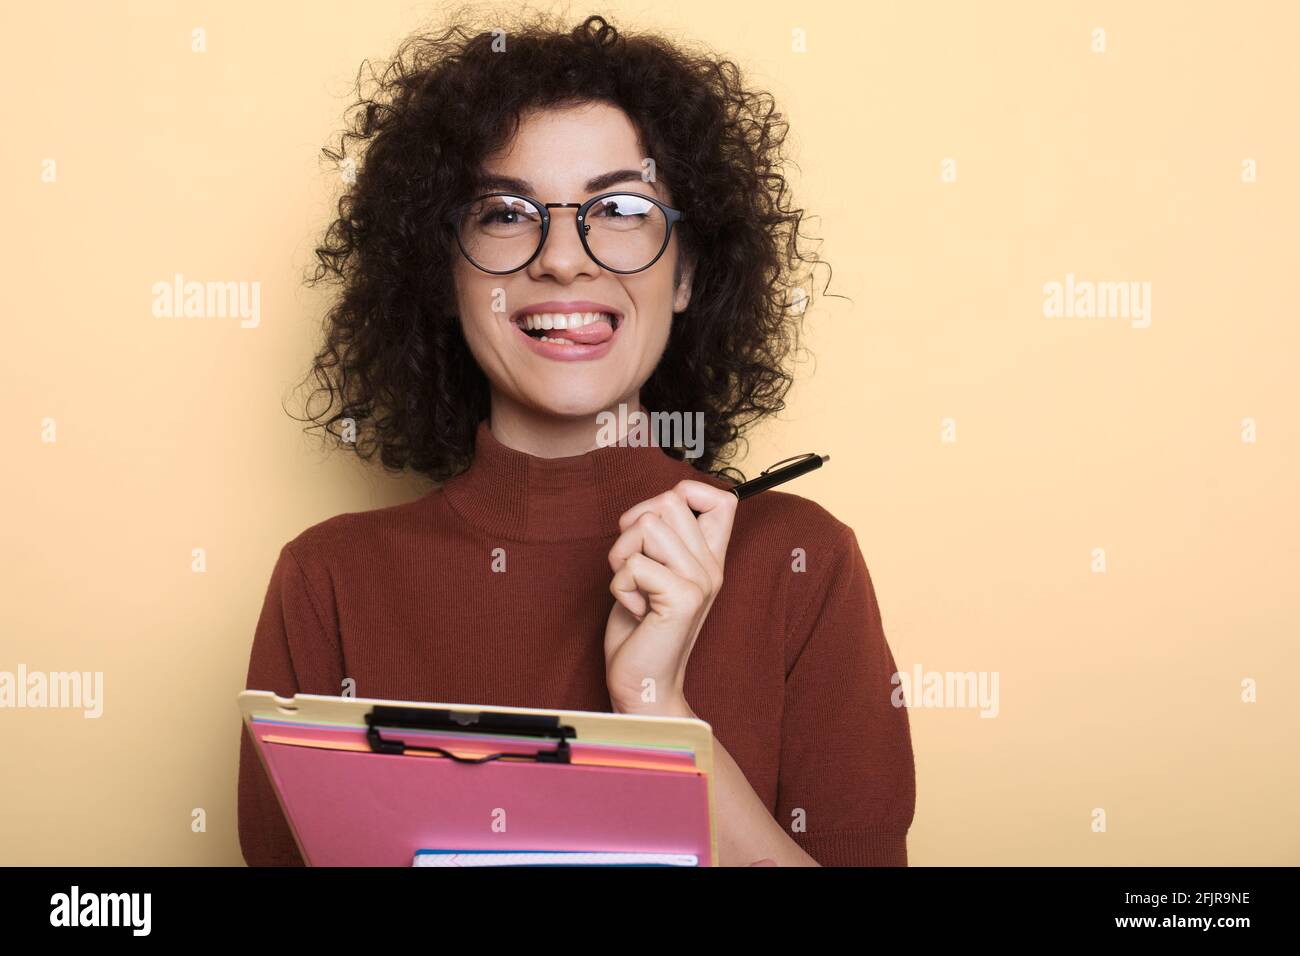 Adorable student with curly hair showing her tongue while holding folder on a yellow studio wall Stock Photo